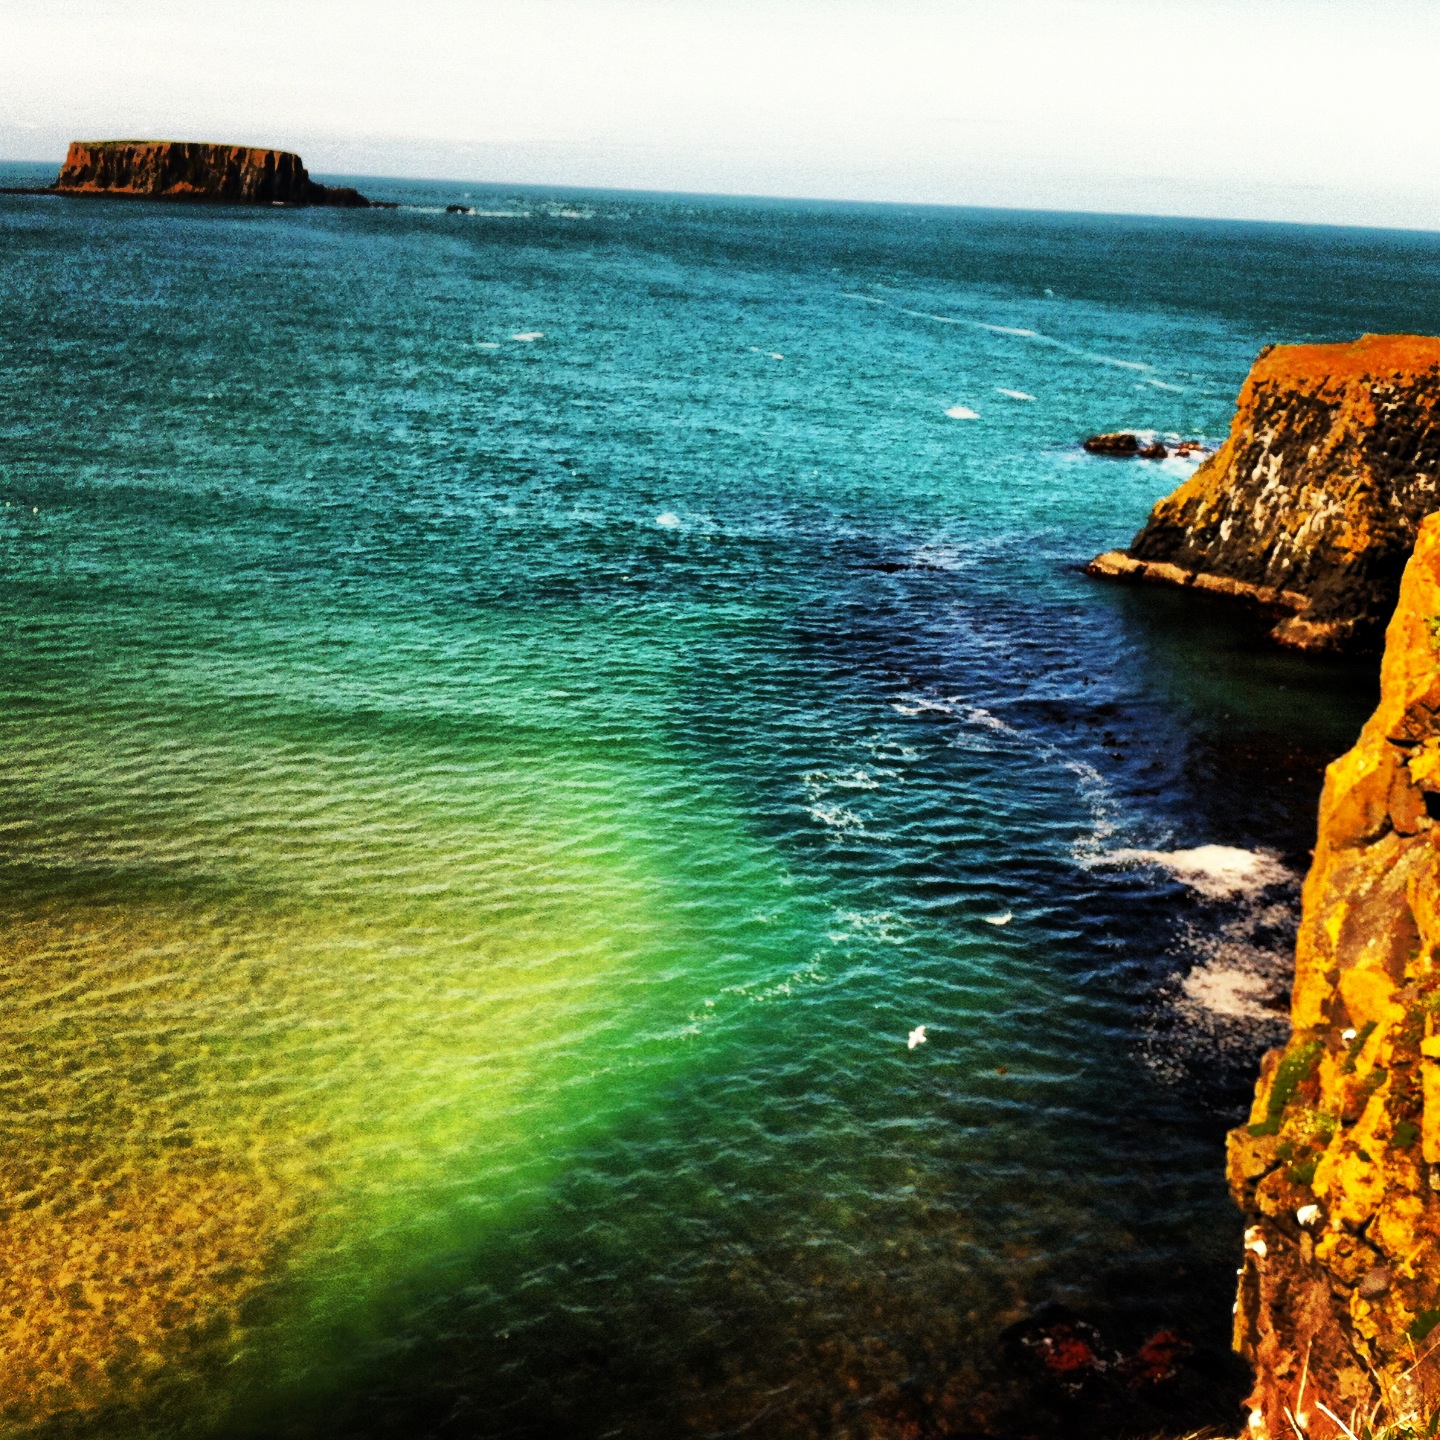 Carrick-a-Rede: a Rope Bridge & the Brightly Colored Ocean – The